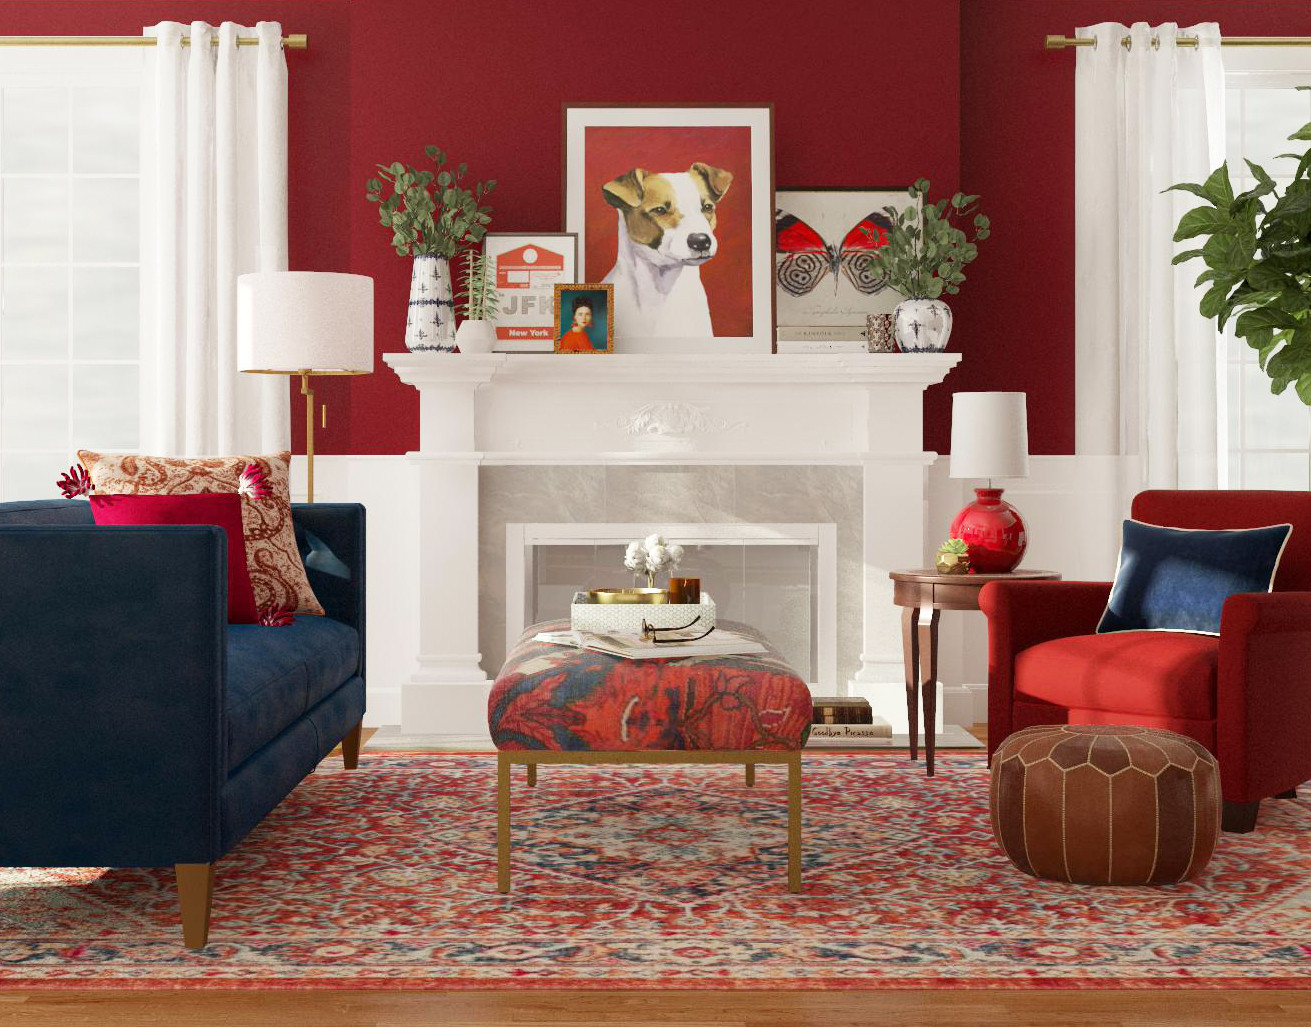 Red Living Room Ideas
 5 Designer Approved 5 Red Living Room Ideas that are